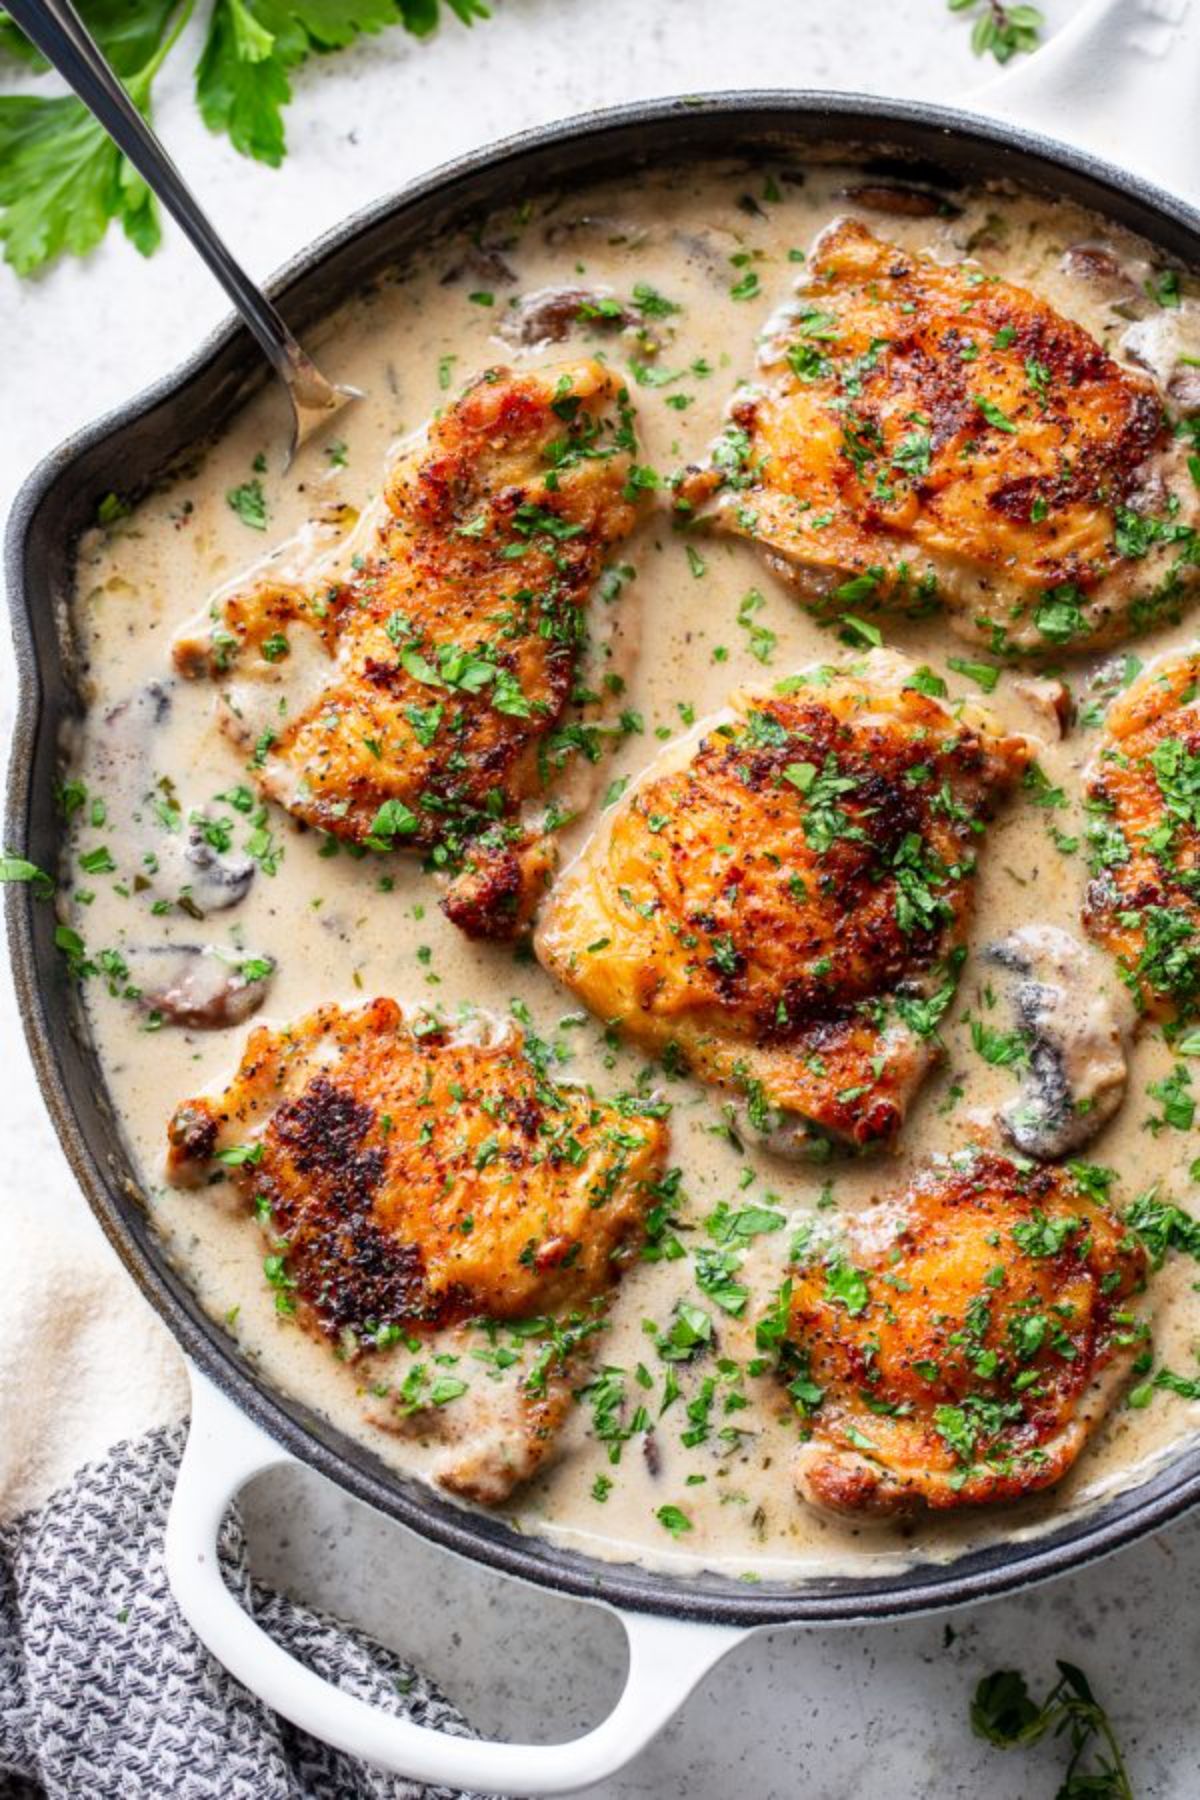 a skillet with chicken thigs in a garlic and herb sauce